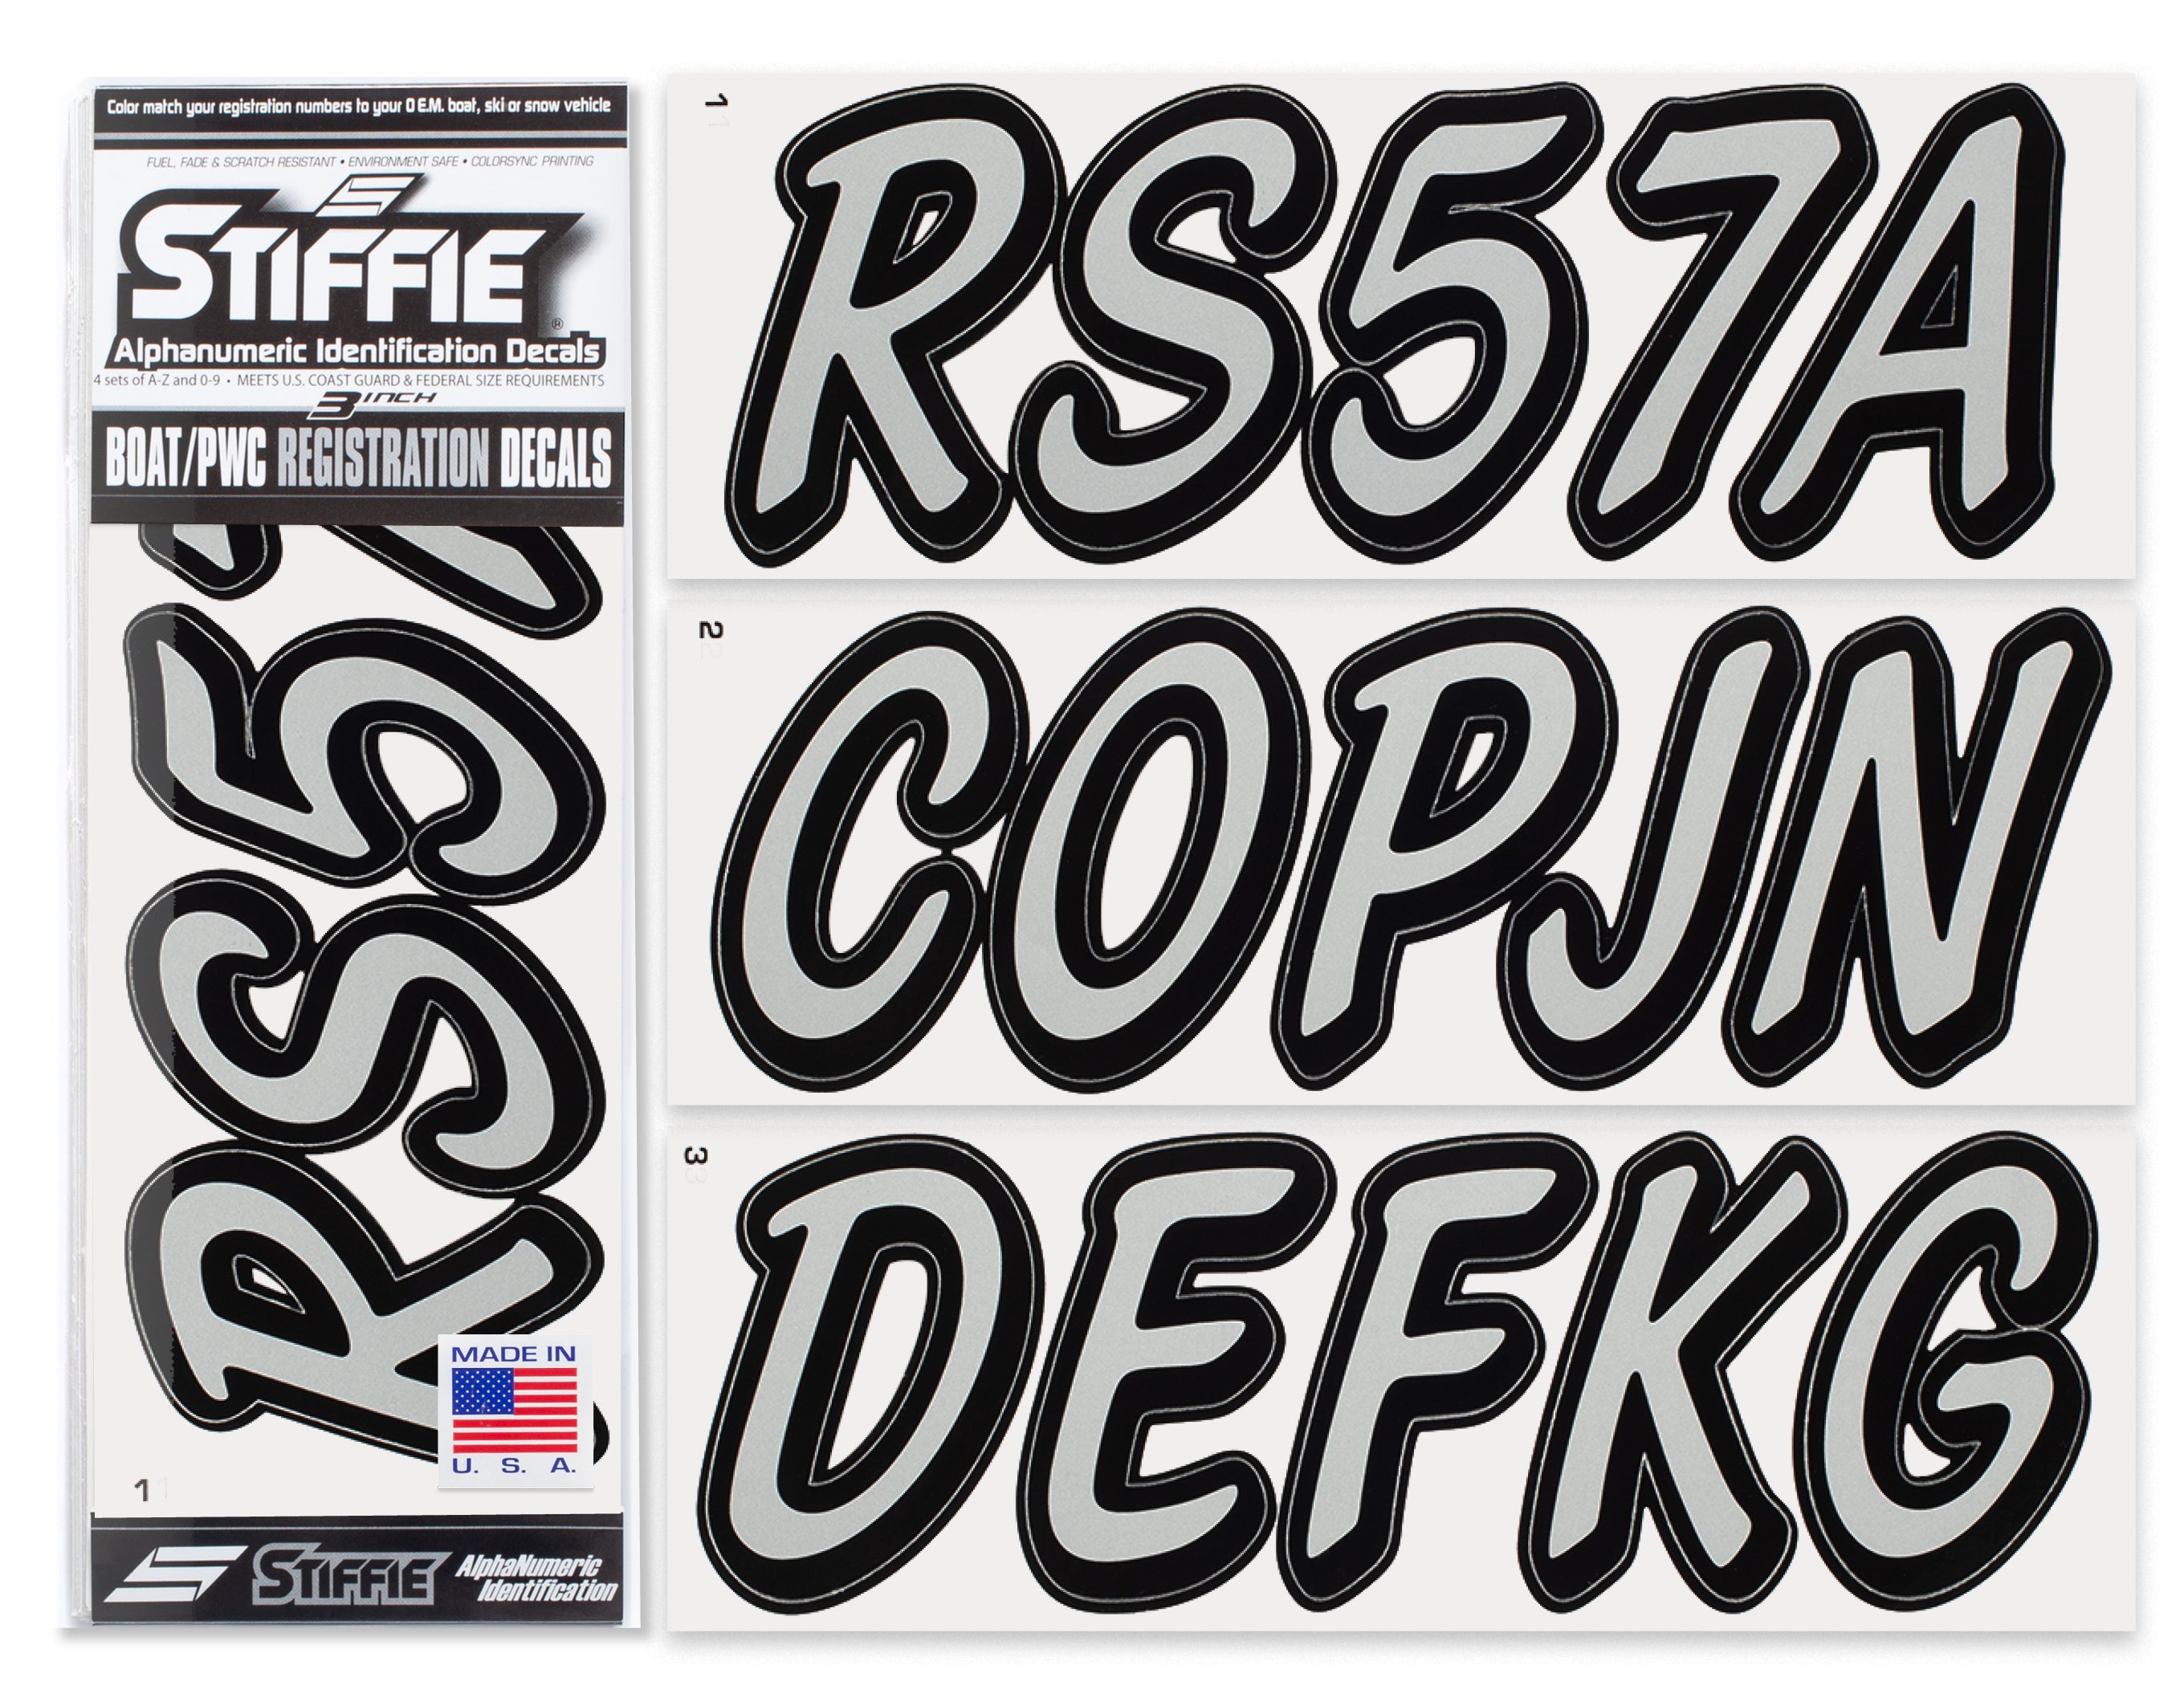 STIFFIE Whipline Solid Metallic Silver/Black 3" Alpha-Numeric Registration Identification Numbers Stickers Decals for Boats & Personal Watercraft